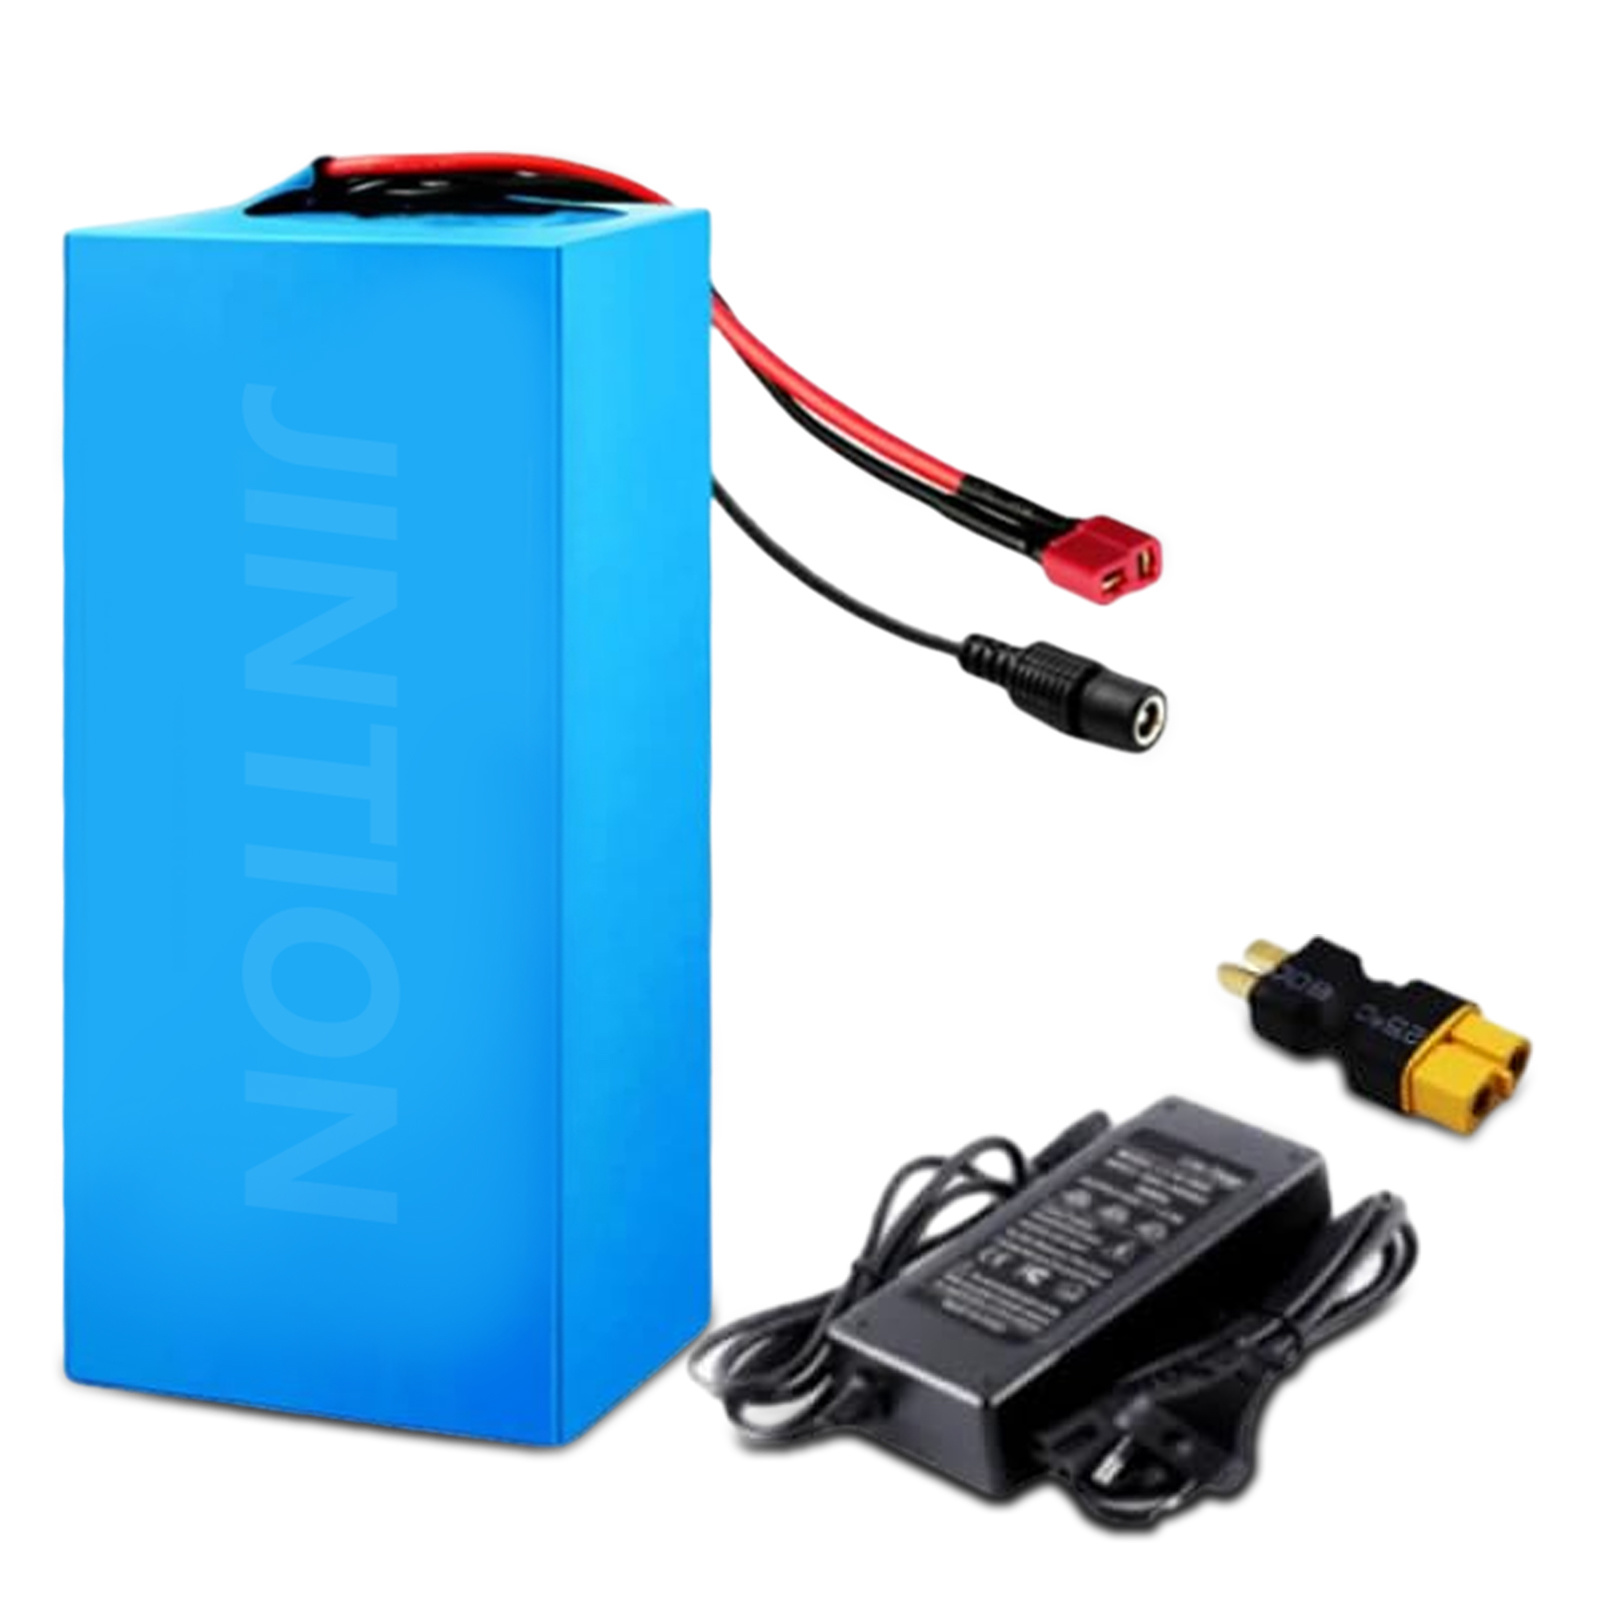 JINTION 60v lifepo4 battery 30ah lifepo4 battery lifepo4 Bike Motor Electric Scooter Ebike Battery with BMS